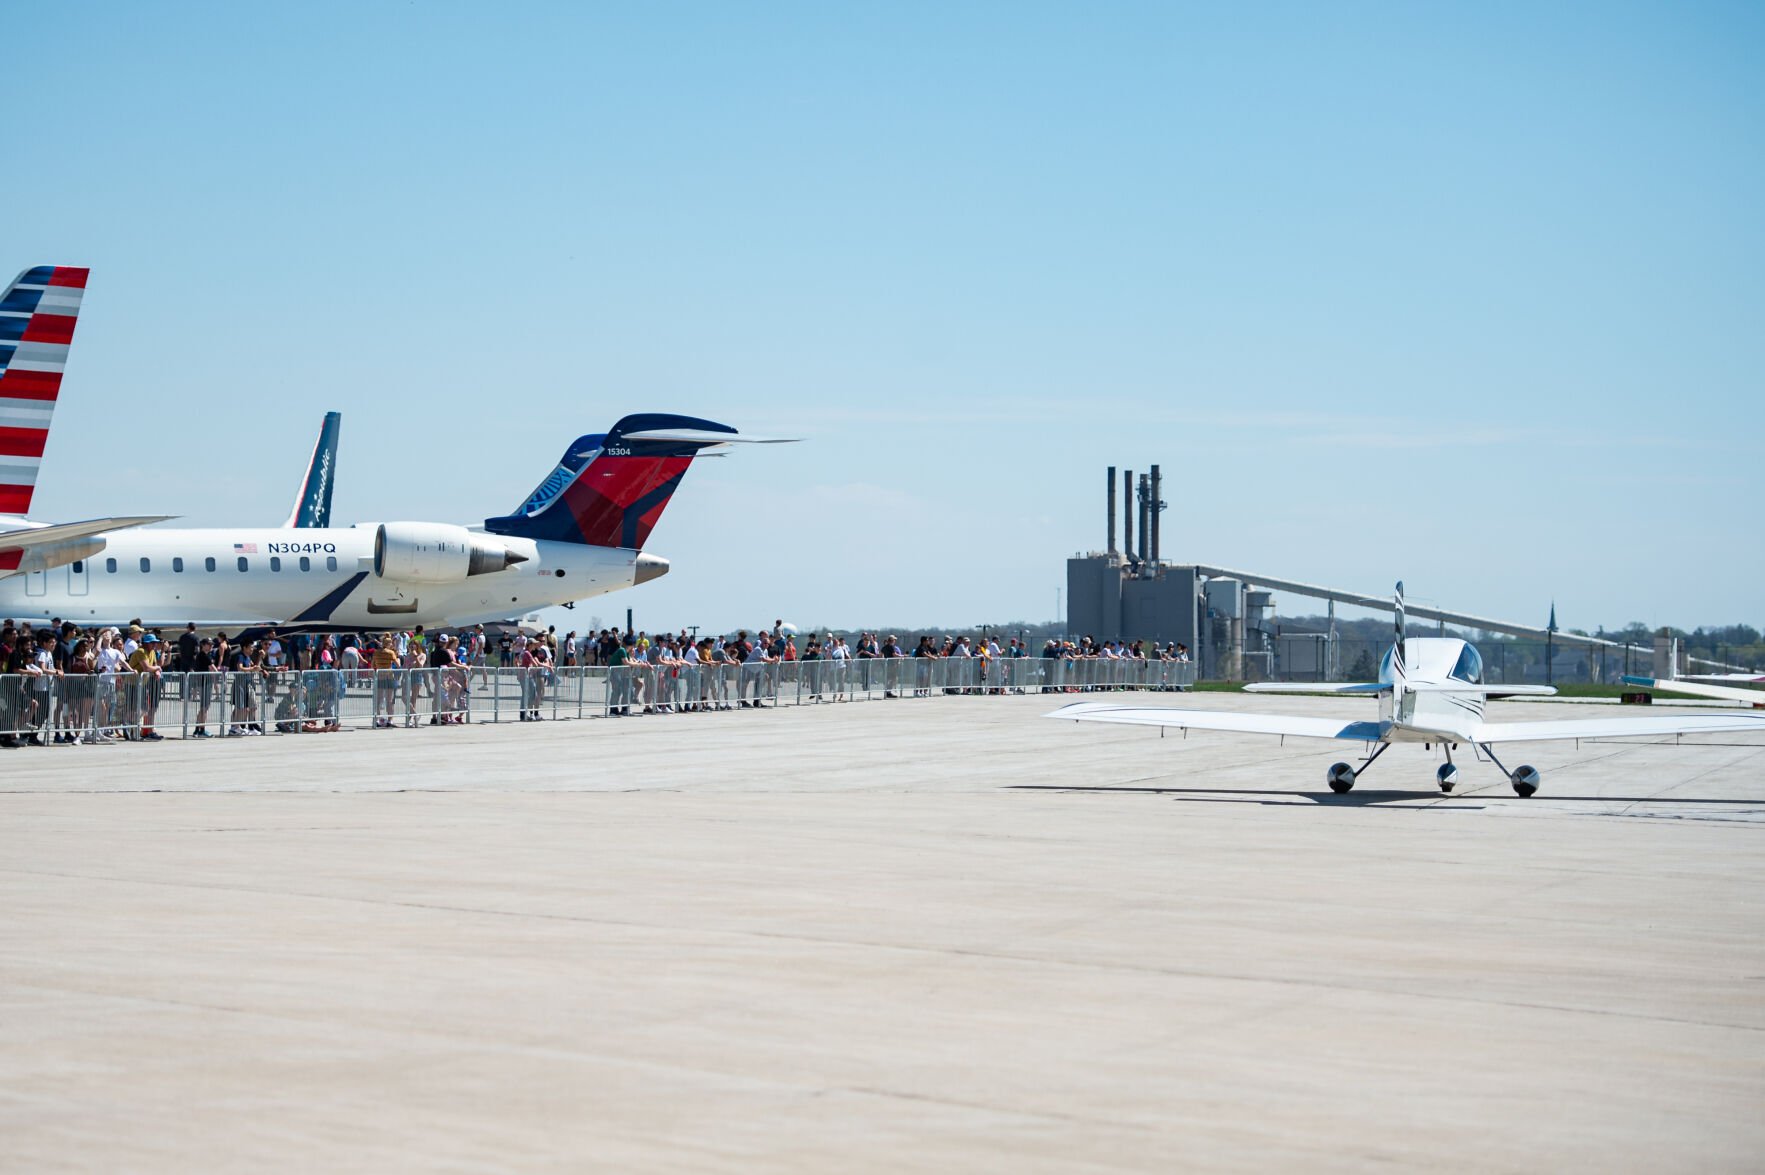 Purdue Aviation Day brings aircraft to Purdue Airport, People watch